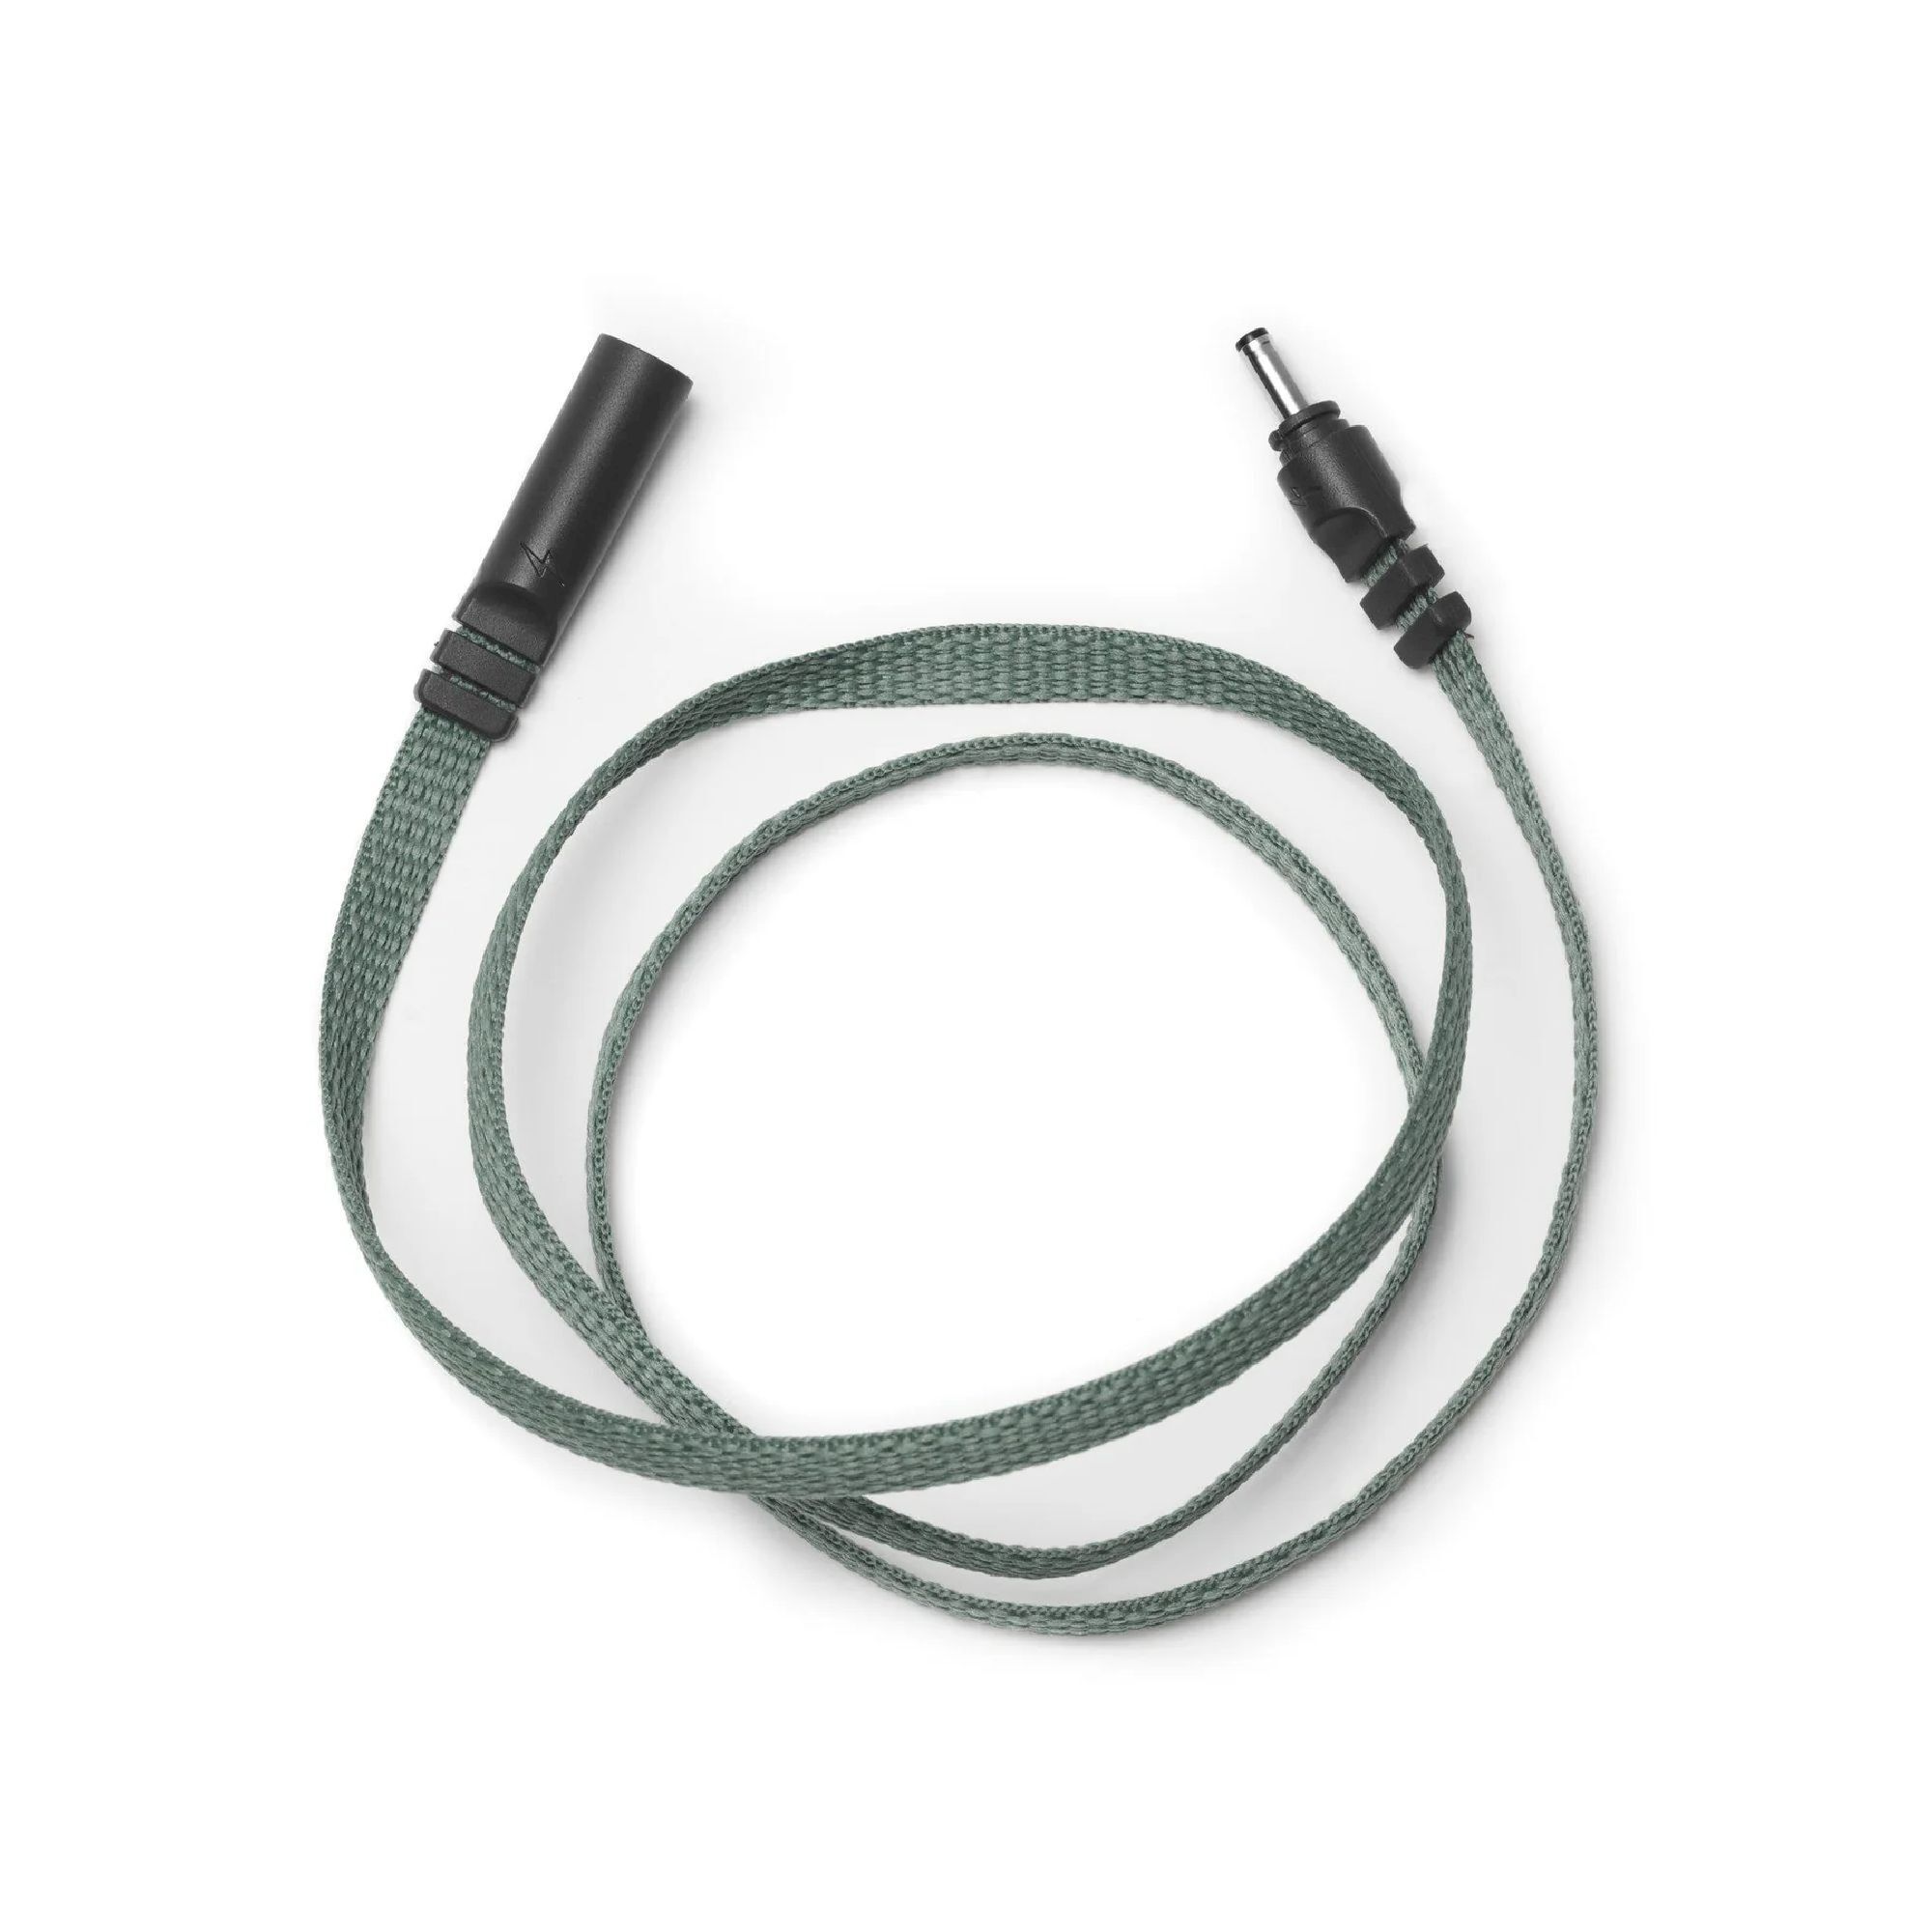 Silva Trail Runner Free 2 Extension Cable - Lampe frontale | Hardloop